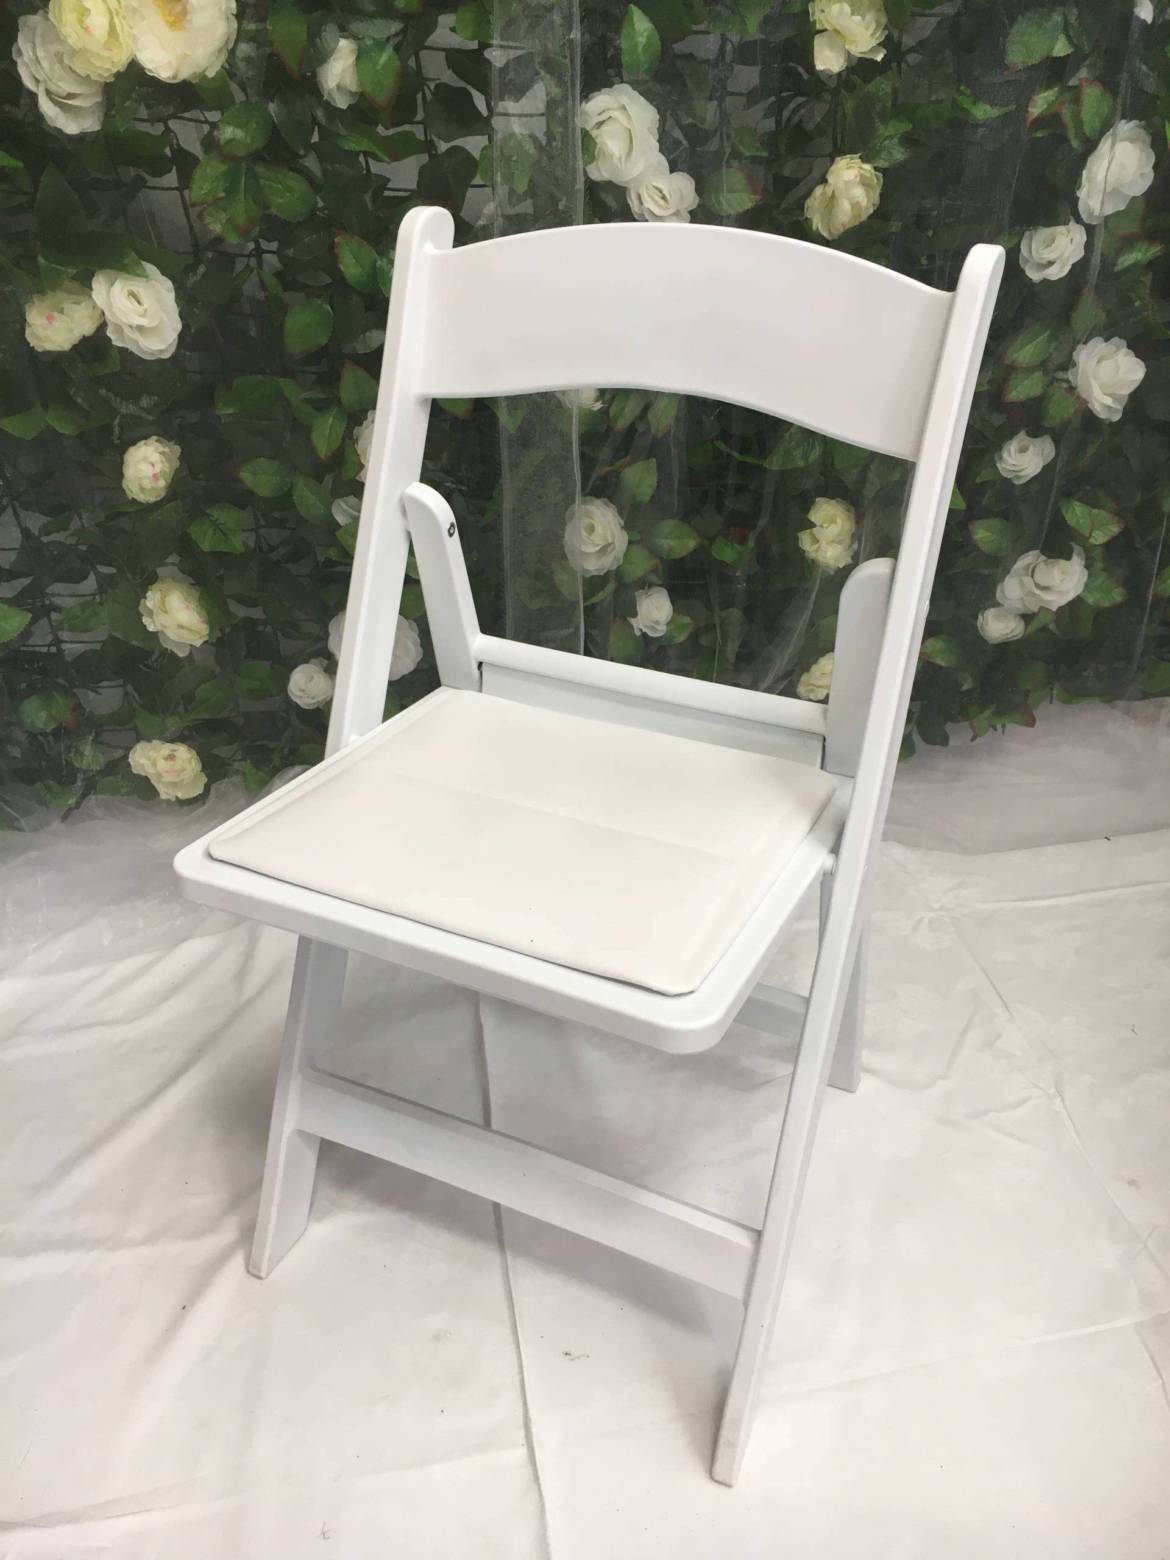 10001-Ceremony-Chair-scaled.jpg